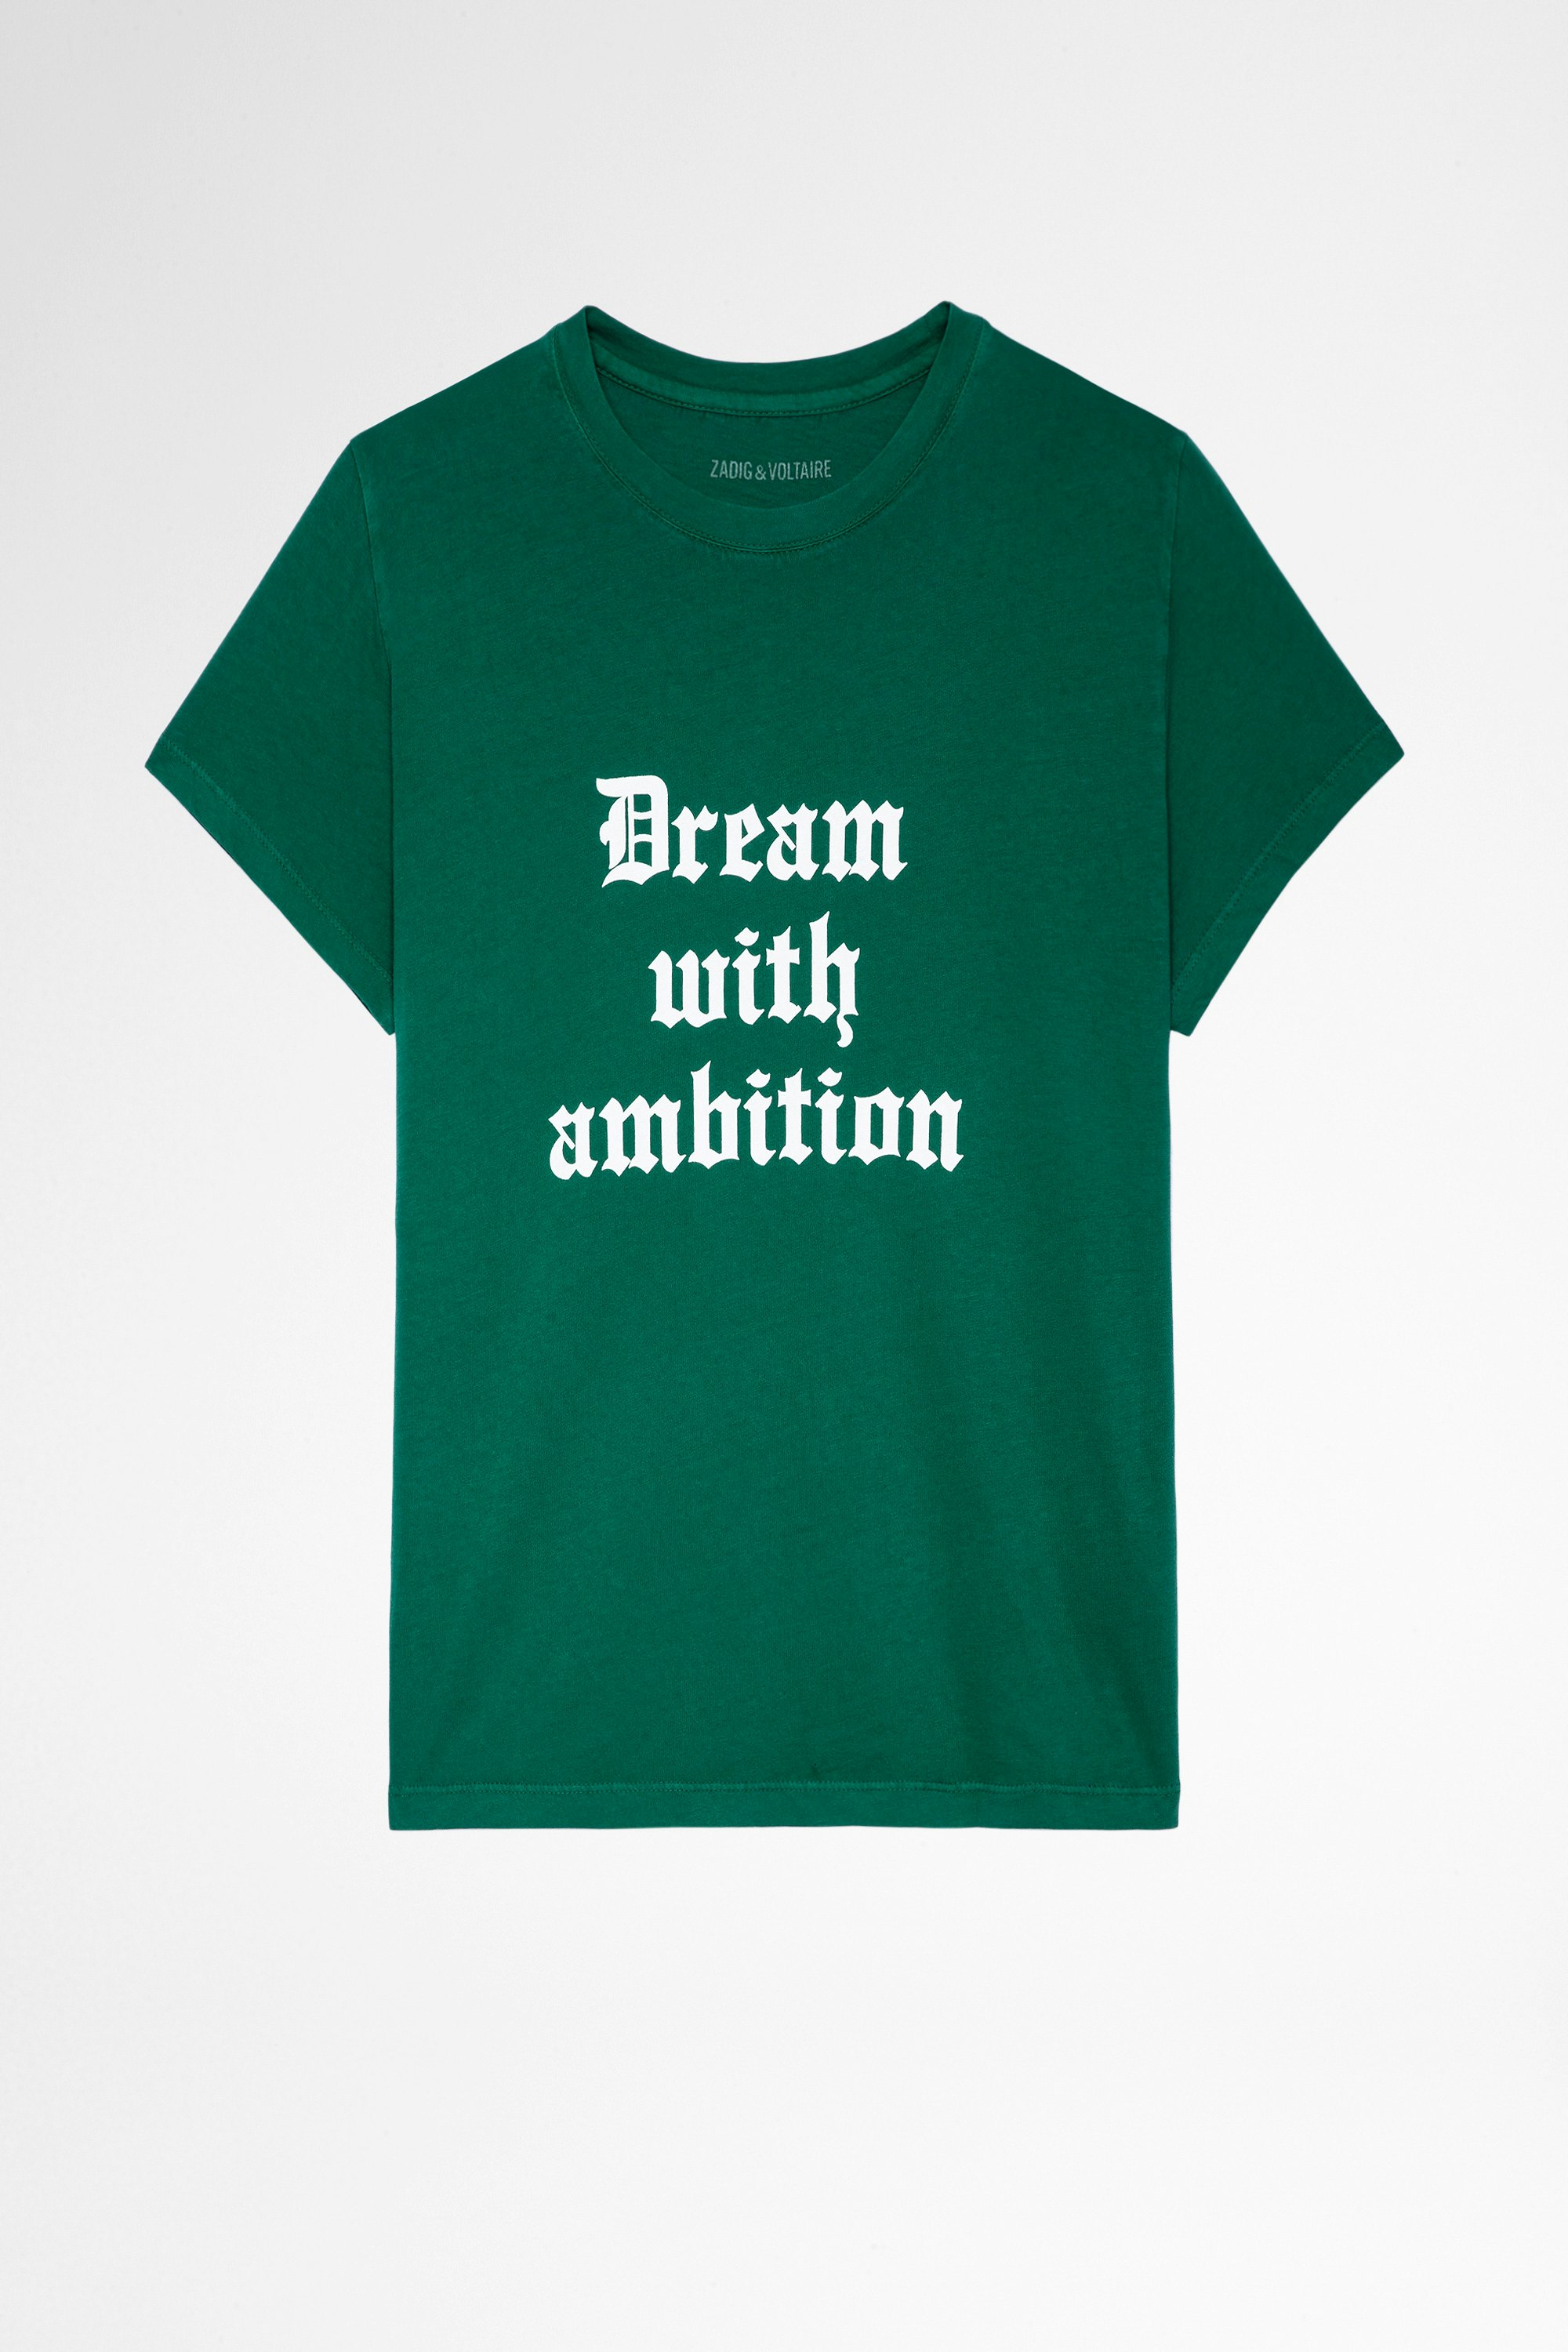 Zoe T-shirt Women's dream with ambition green cotton T-shirt. Made with fibers from organic farming.